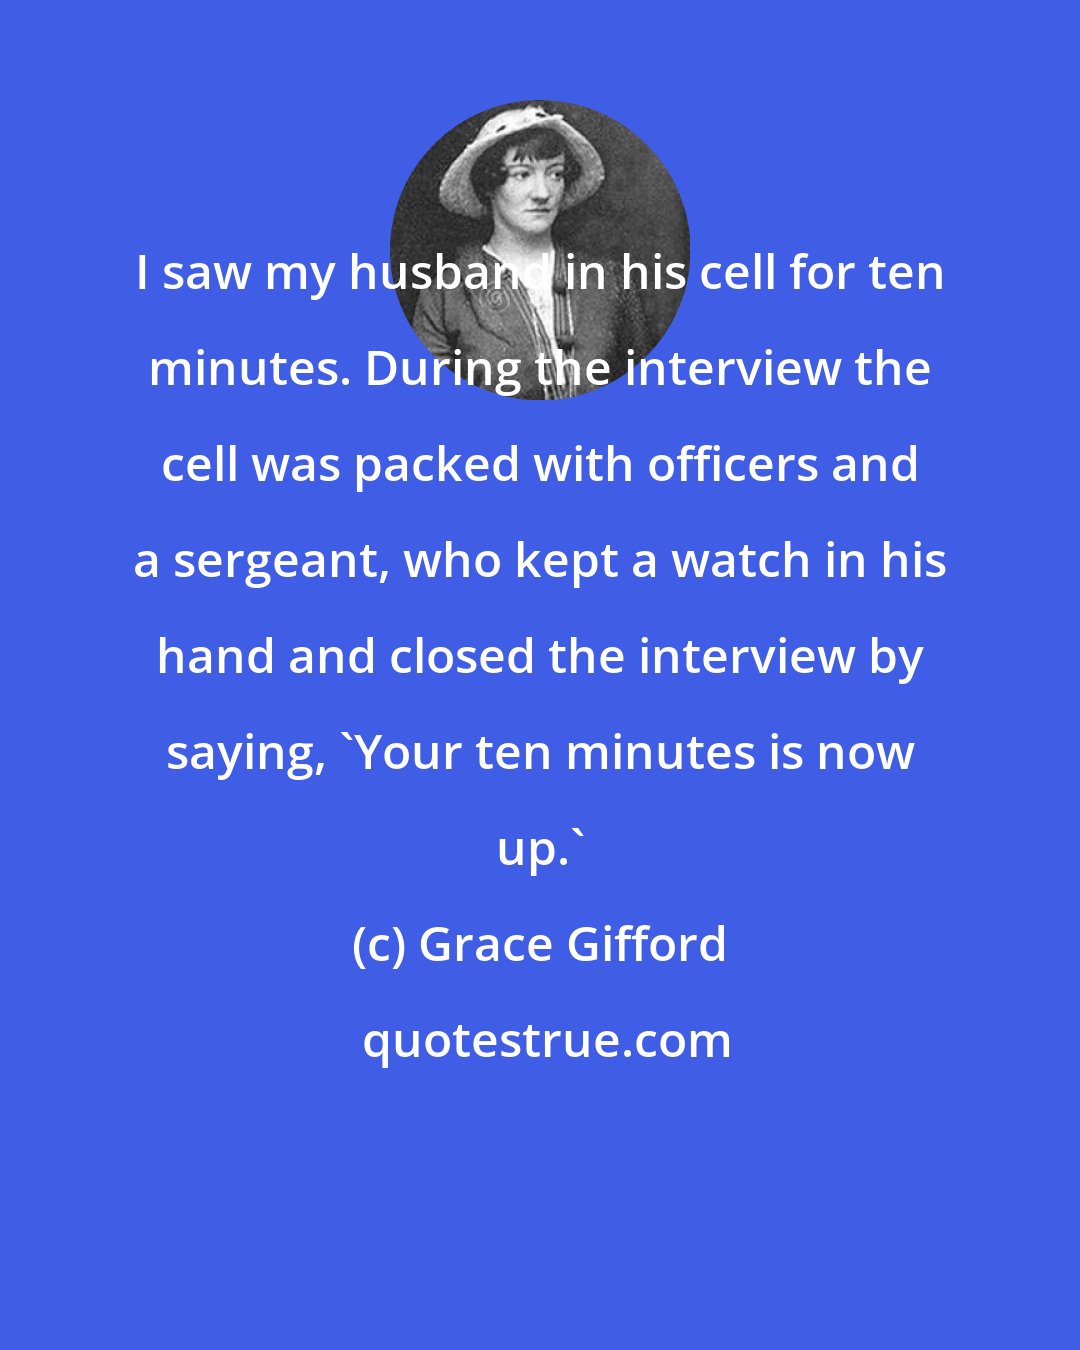 Grace Gifford: I saw my husband in his cell for ten minutes. During the interview the cell was packed with officers and a sergeant, who kept a watch in his hand and closed the interview by saying, 'Your ten minutes is now up.'